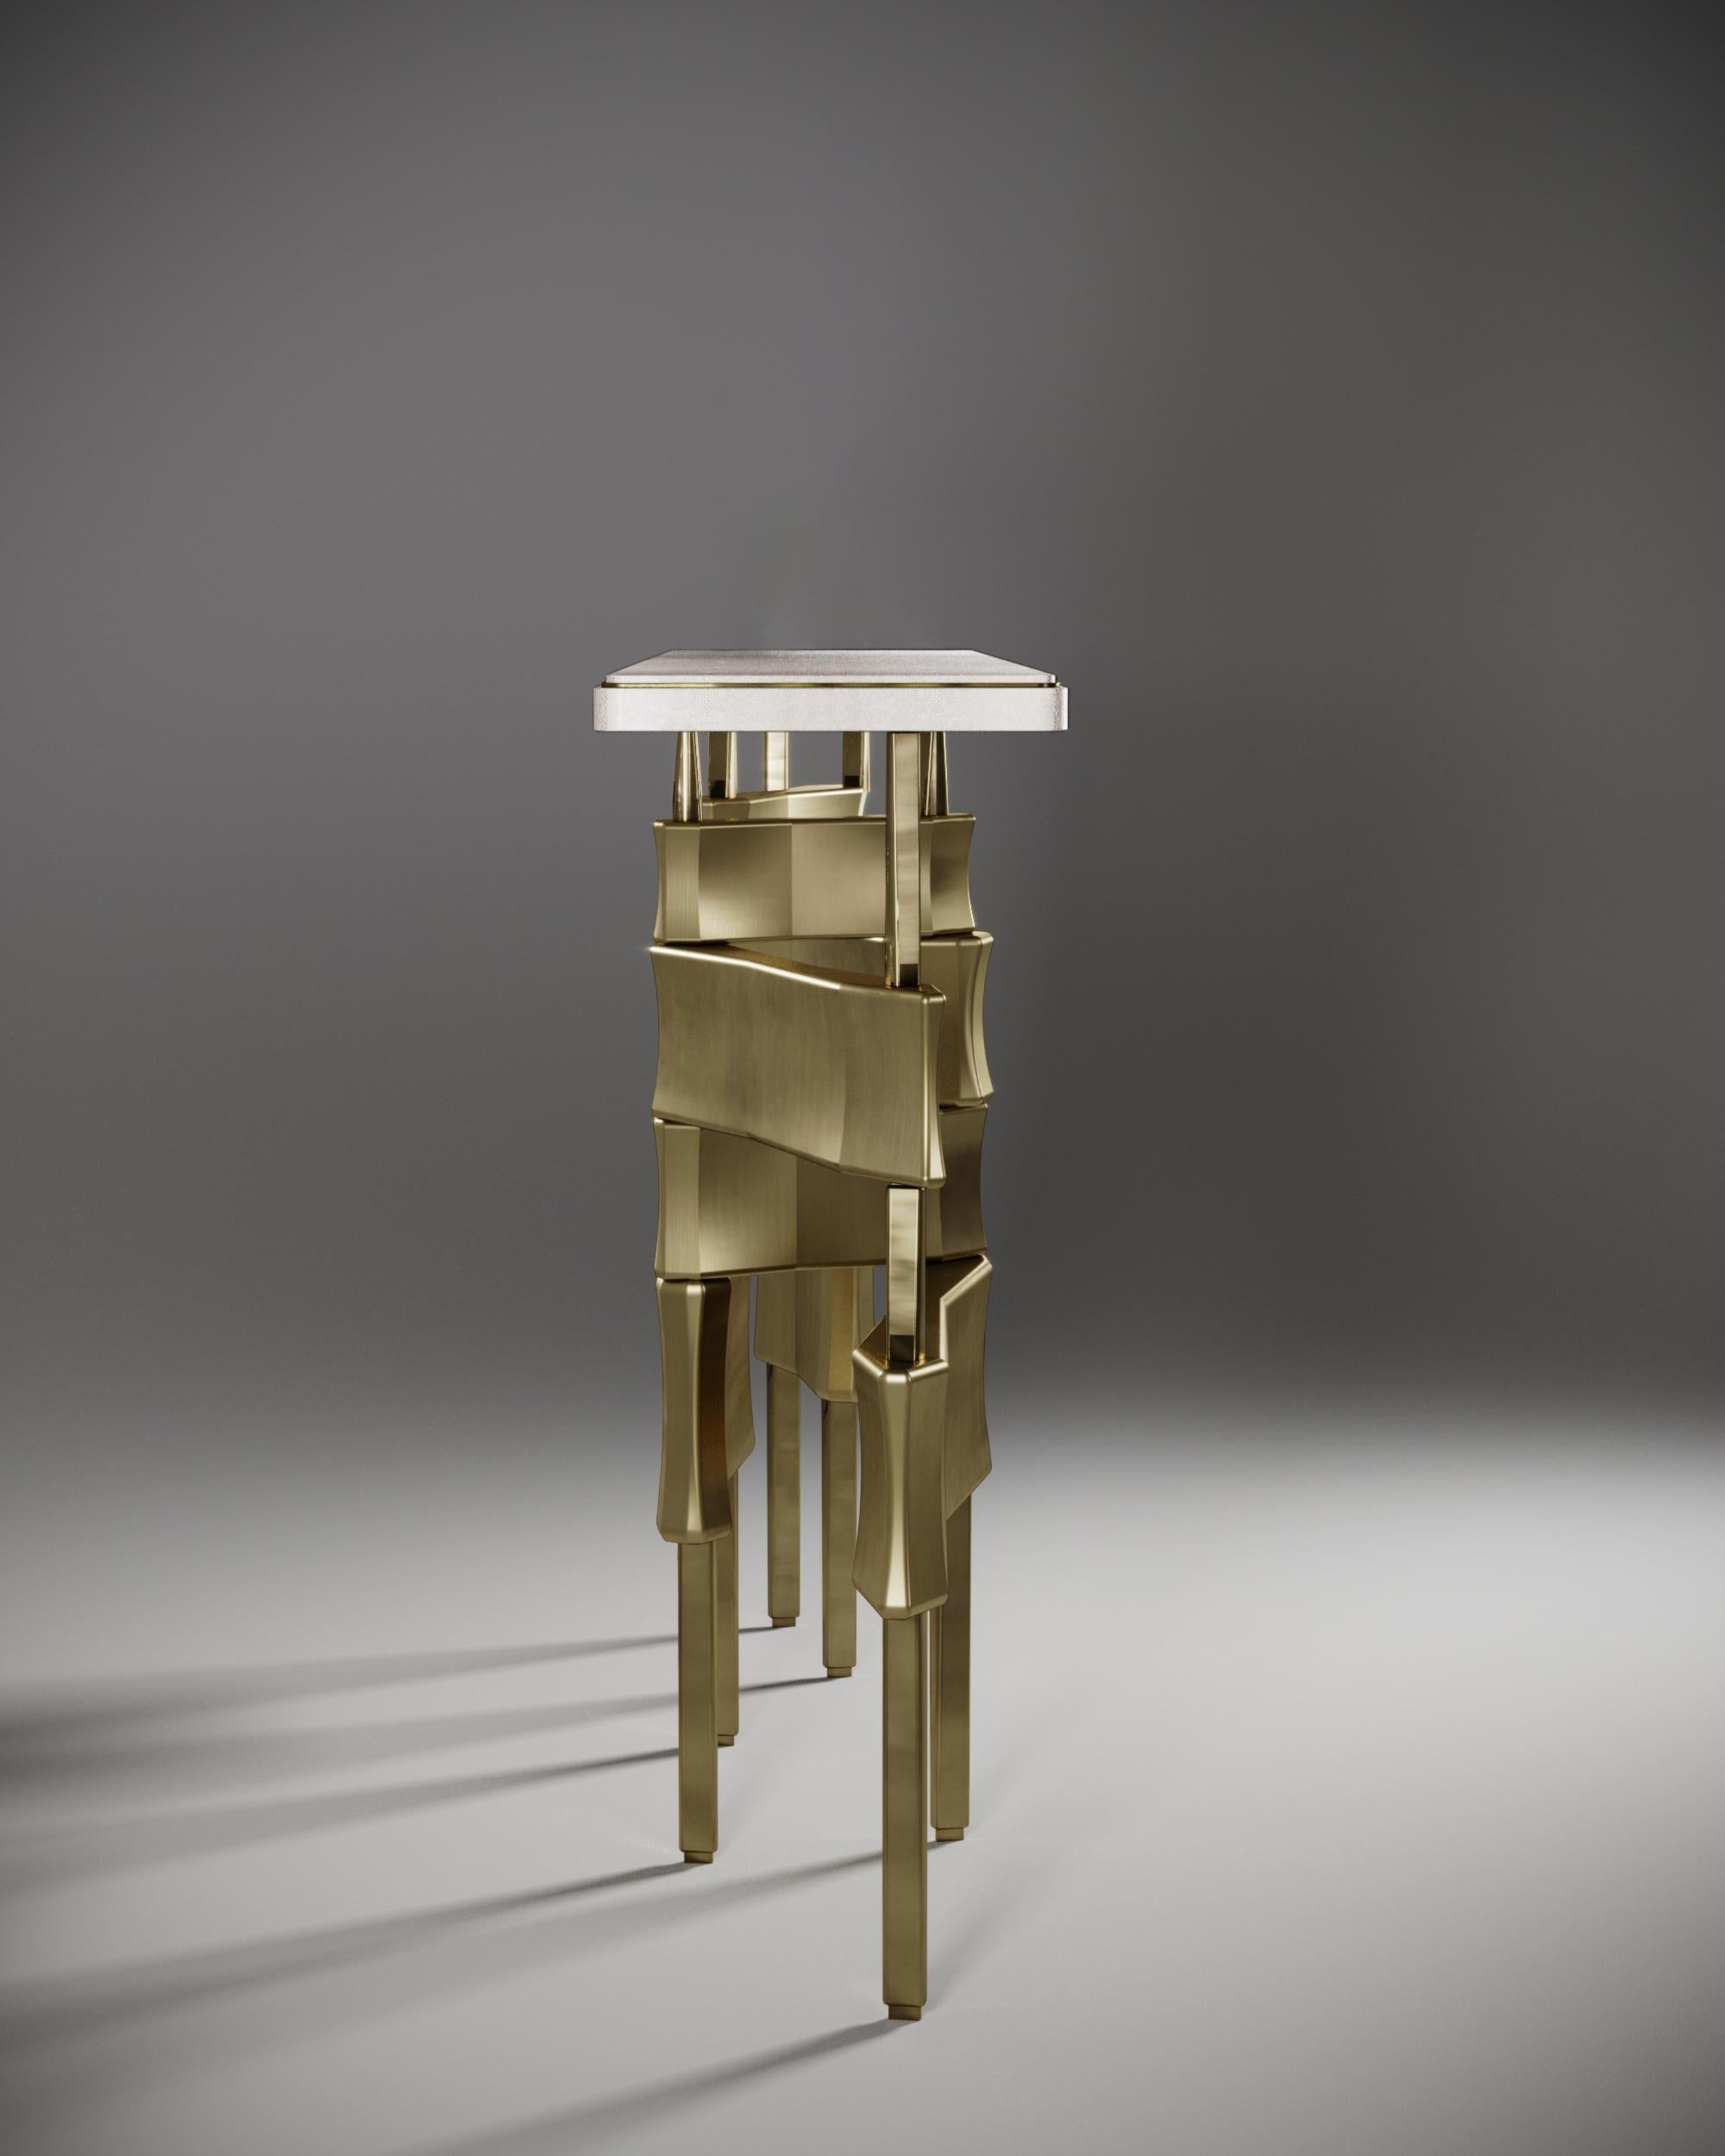 Hand-Crafted Quartz Console Table with Polished Stainless Steel Details by Kifu Paris For Sale